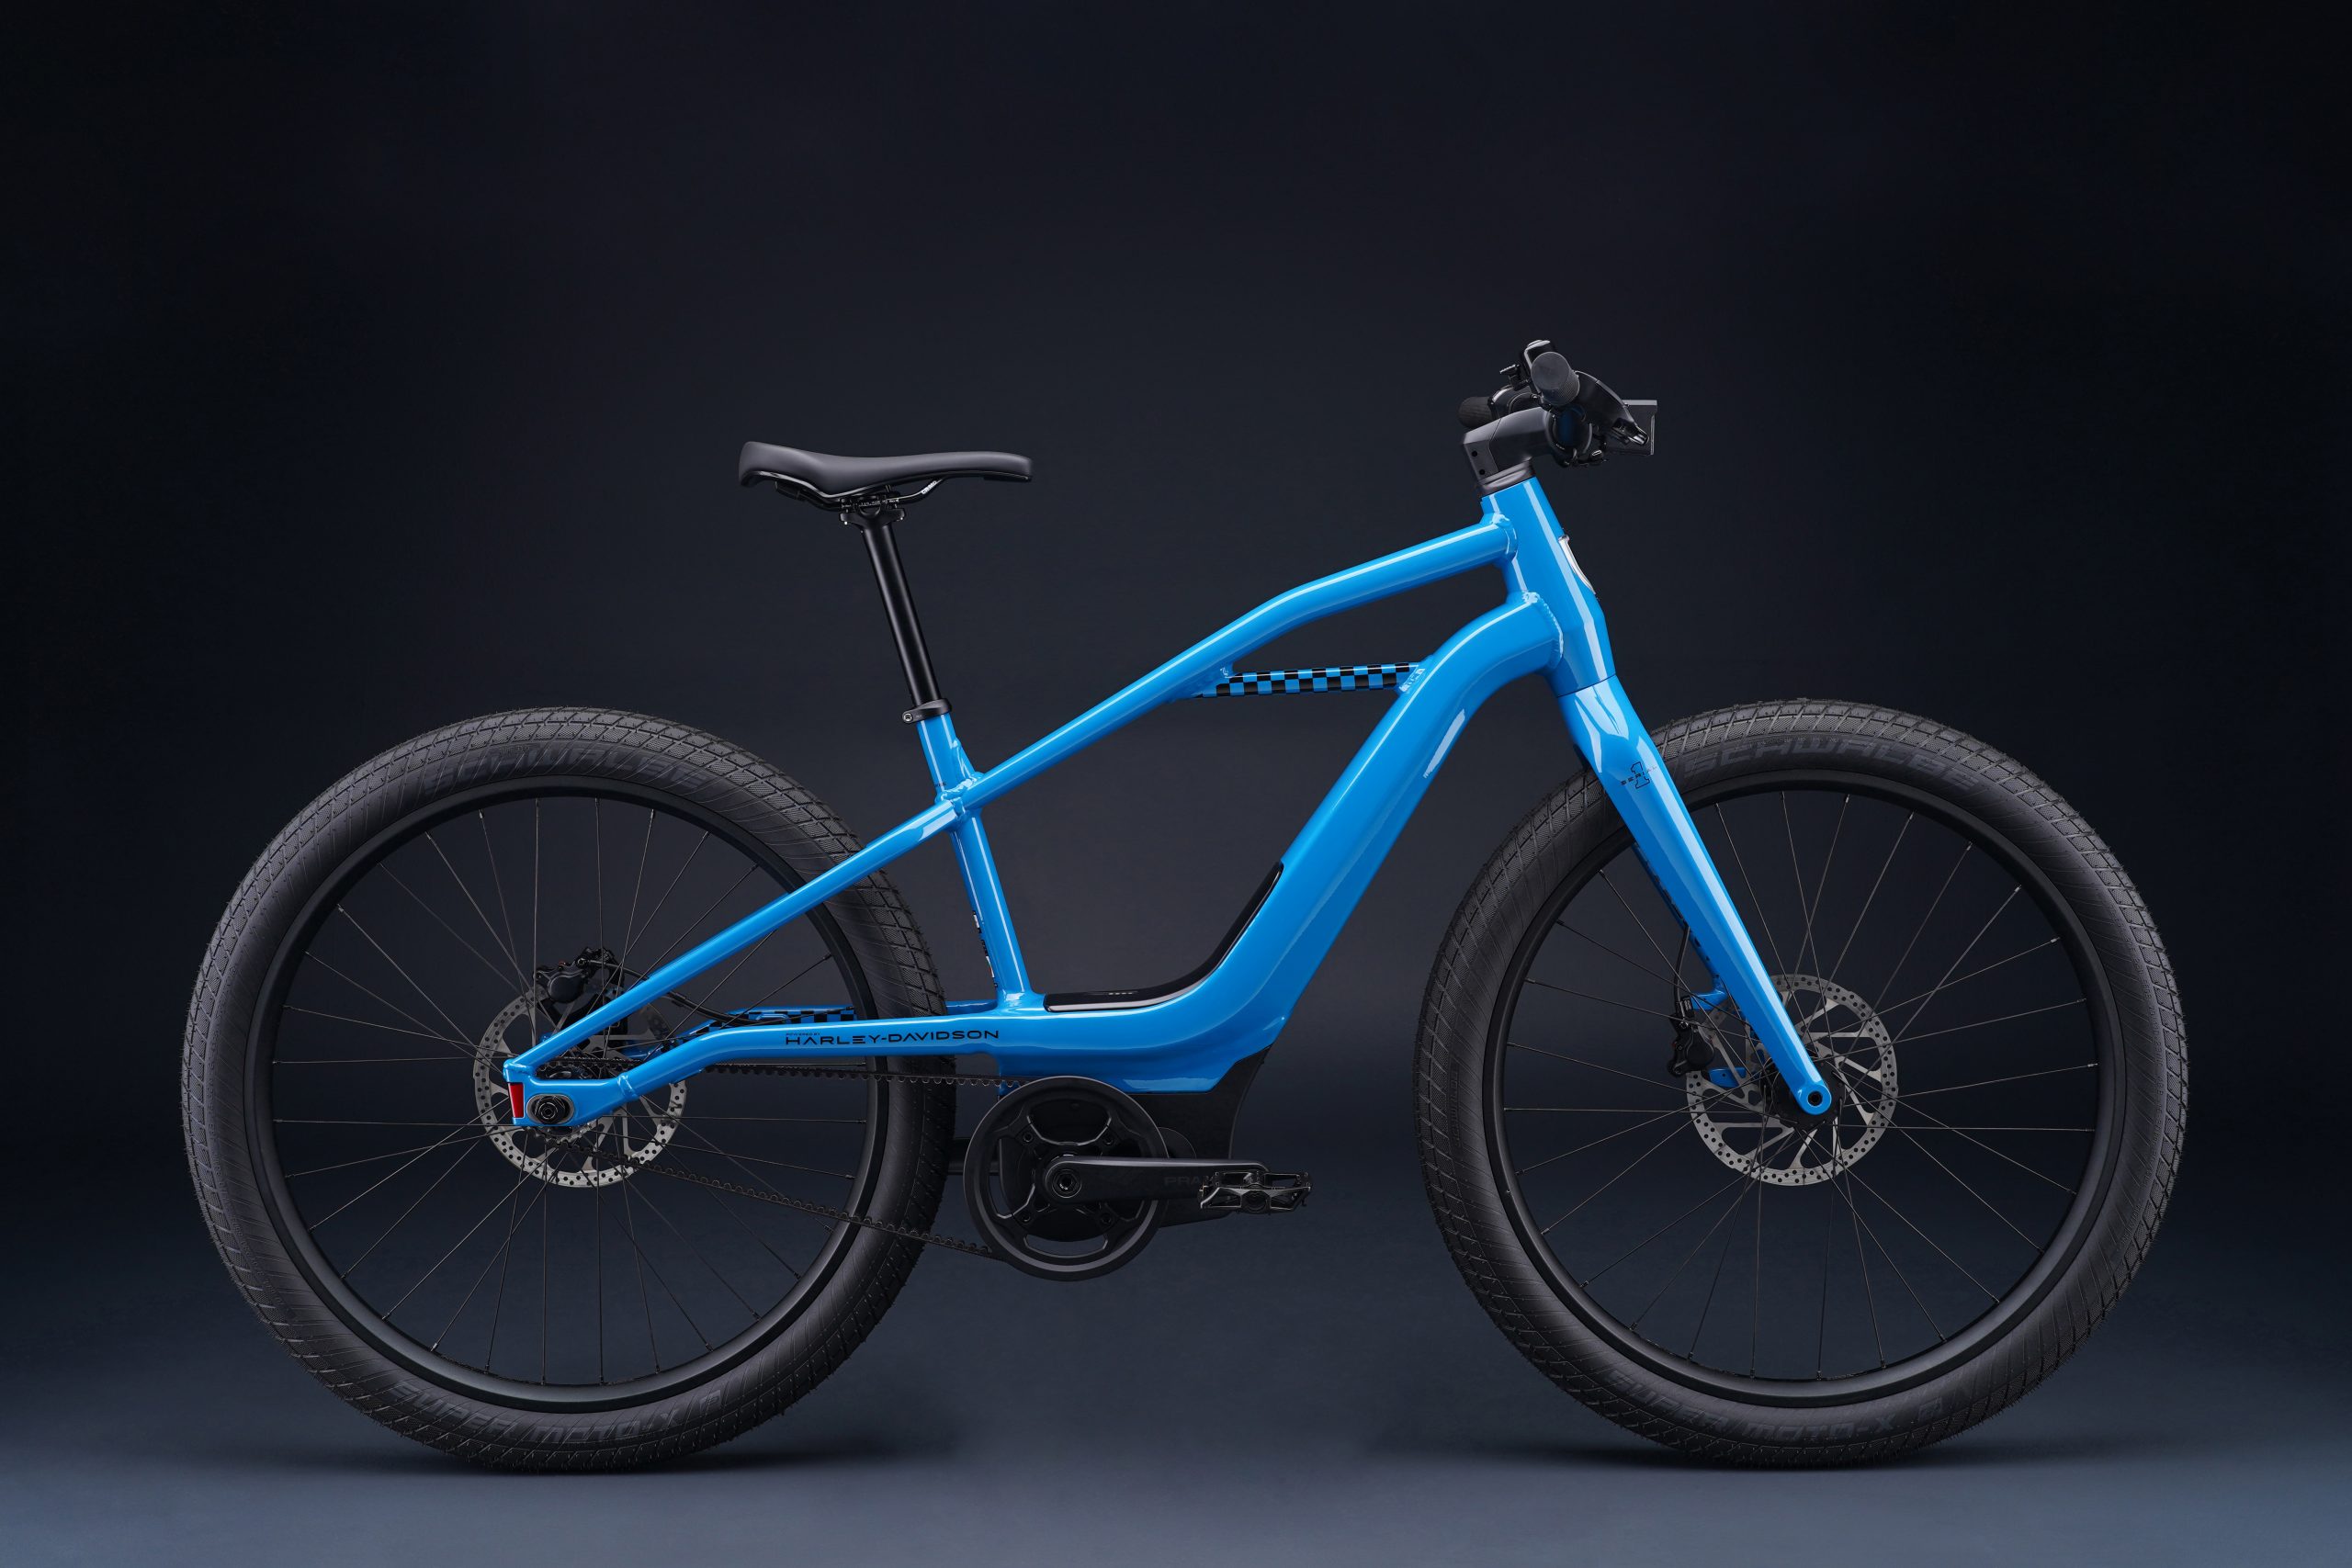 SERIAL 1, Powered by Harley-Davidson, Launches Second-Generation /CTY ebikes with Google Cloud Connectivity